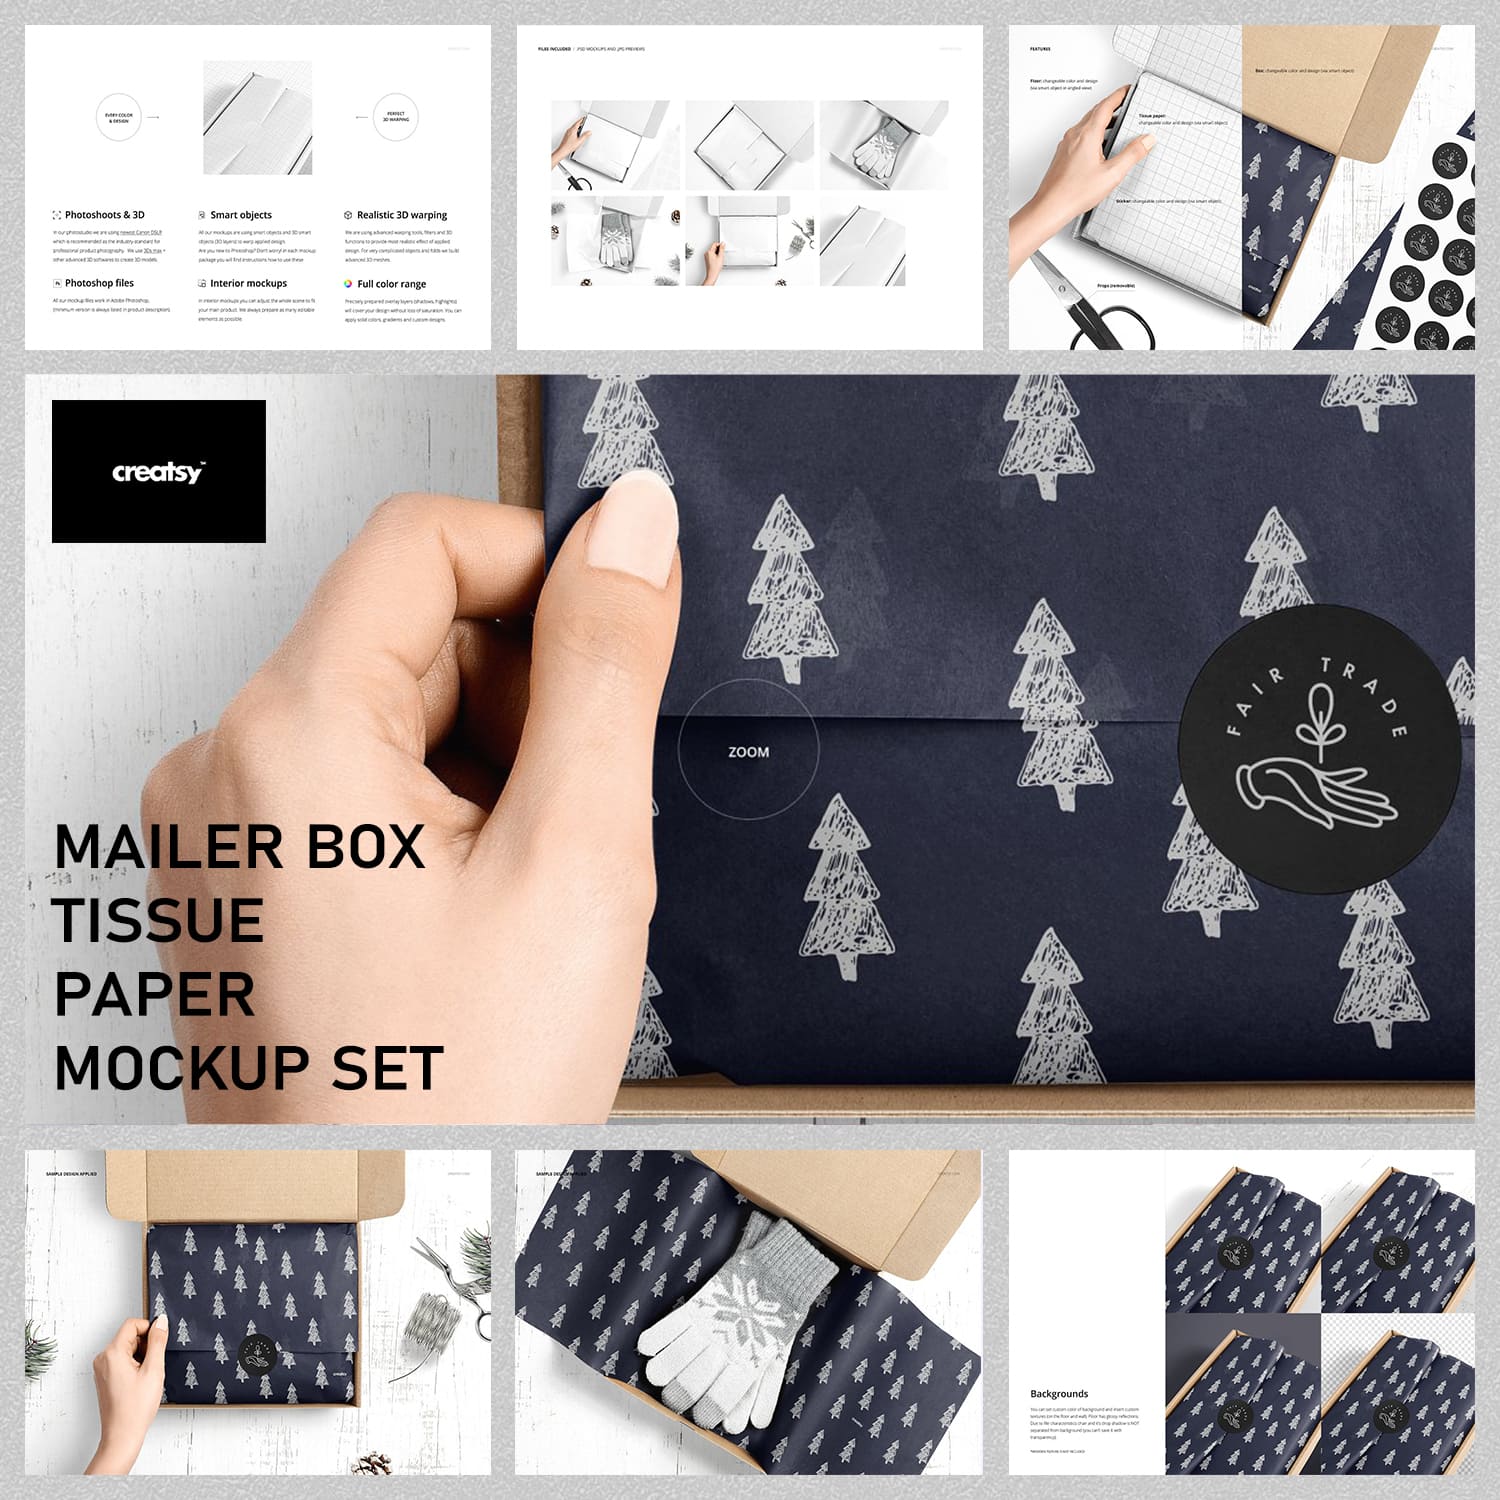 Mailer Box Wrapping Tissue Paper Mockup Set main cover.